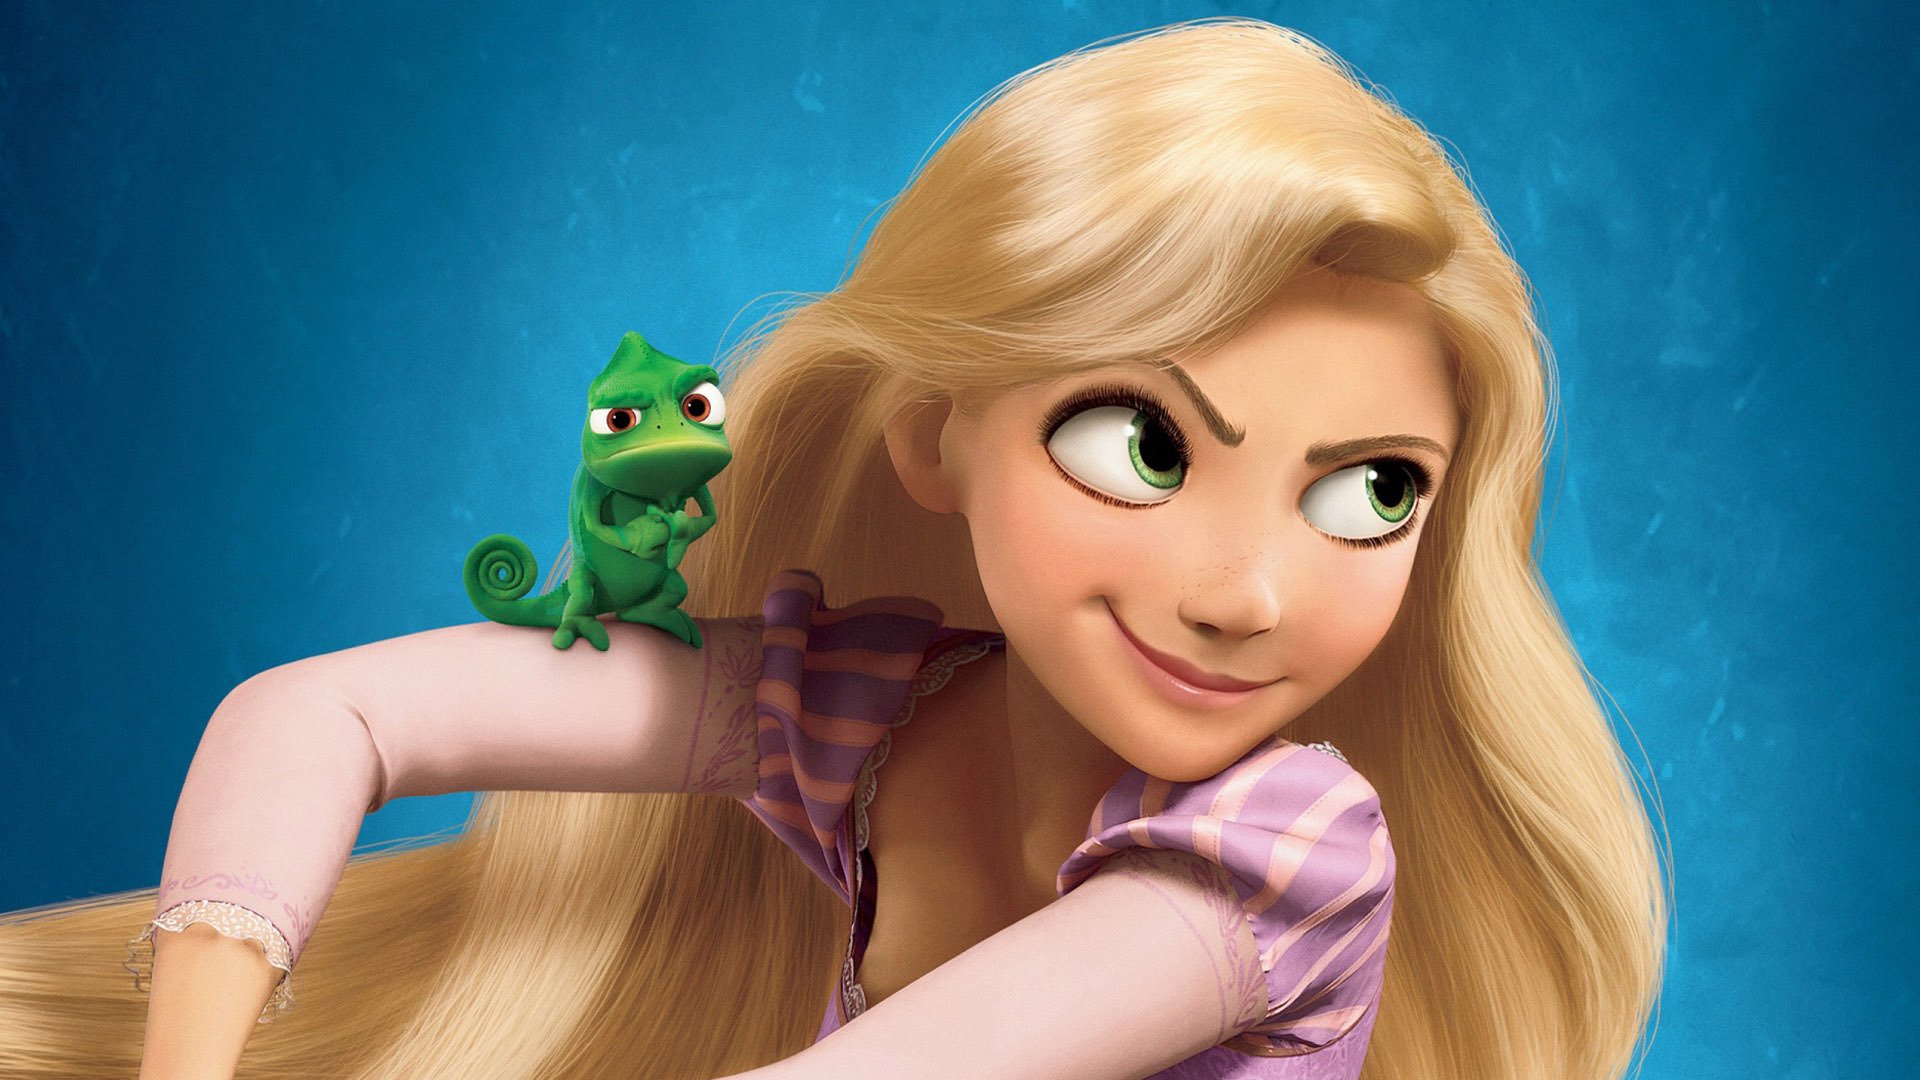 Rapunzel Wallpapers Best Wallpapers - Pascal Tangled And Rapunzel - 1920x1080  Wallpaper 